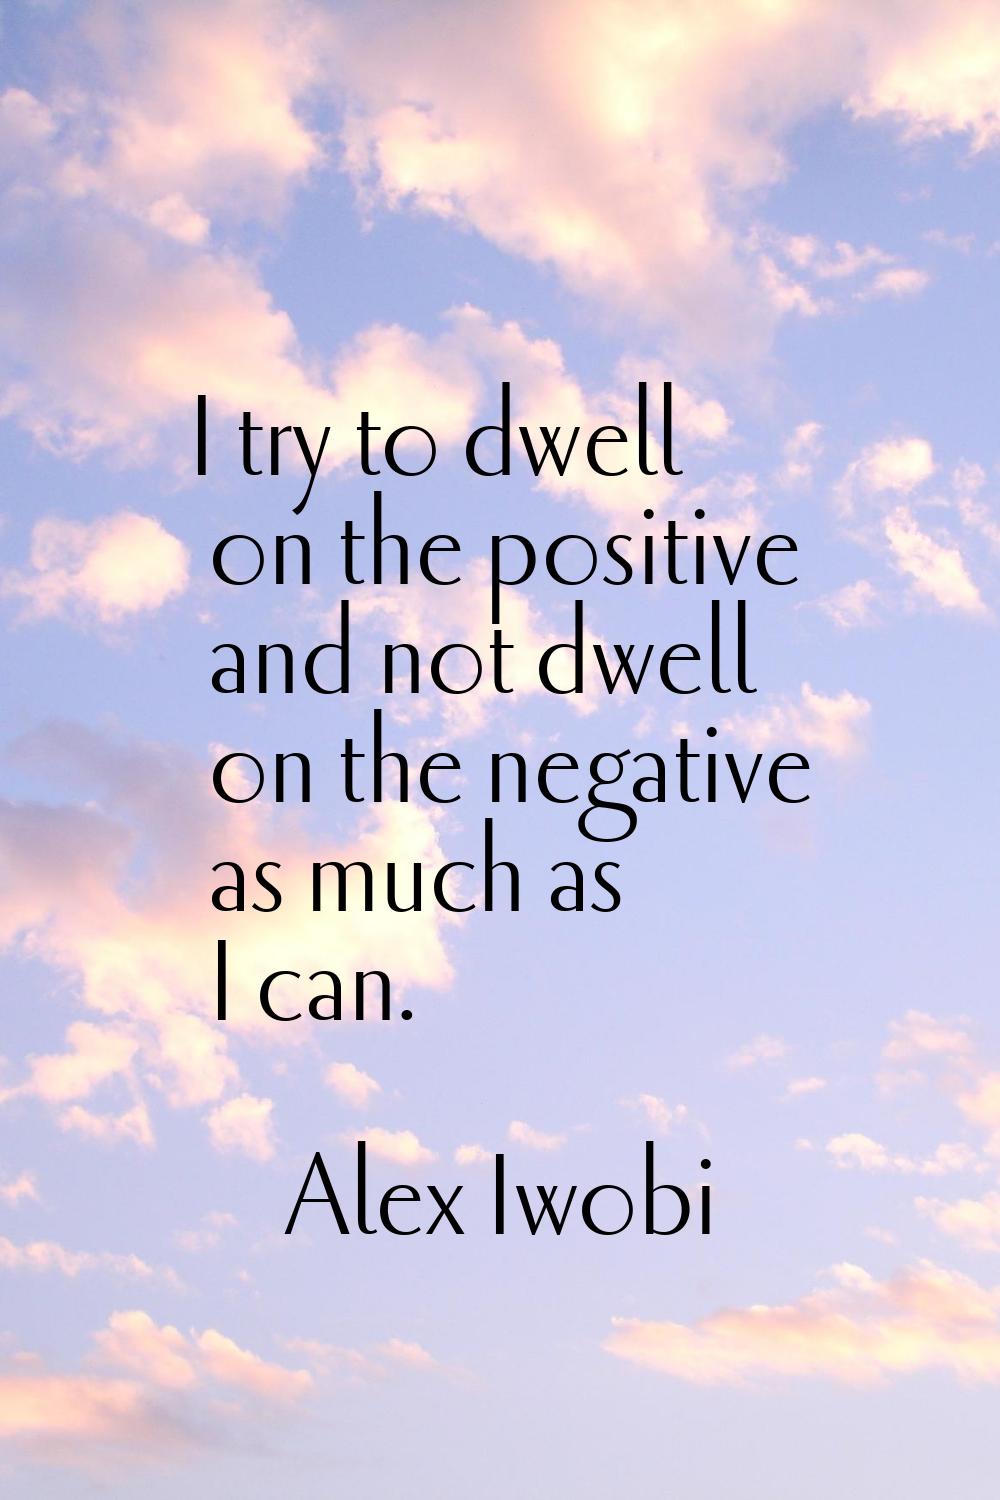 I try to dwell on the positive and not dwell on the negative as much as I can.